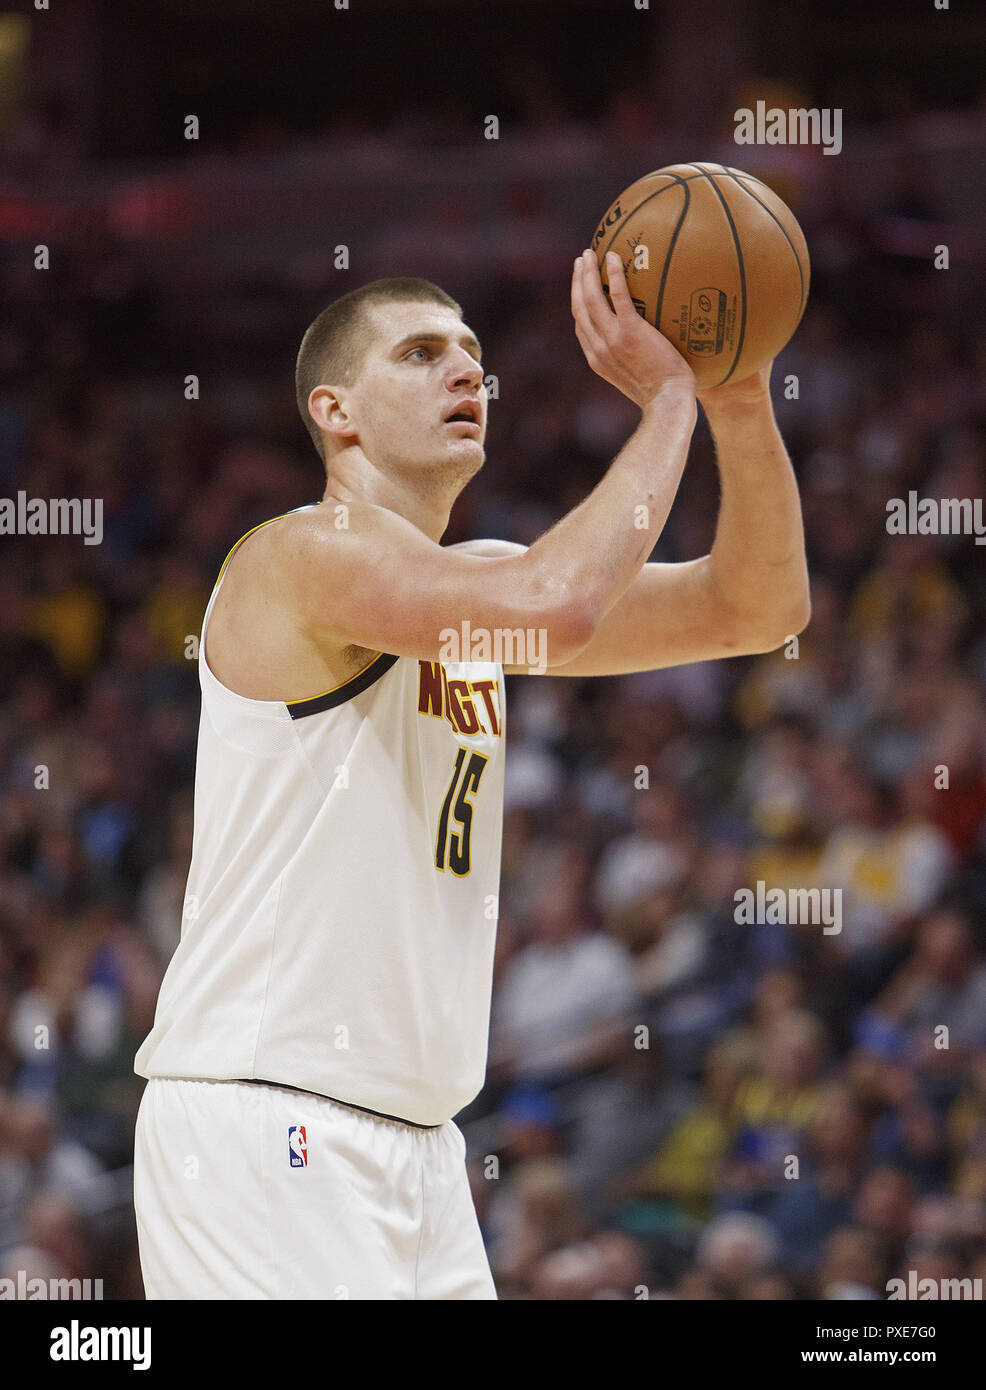 Denver, Colorado, USA. 21st Oct, 2018. Nuggets NIKOLA JOKIC readies to sink a free throw during the 2nd. Half at the Pepsi Center Sunday night. The Nuggets beat the Warriors 100-98. Credit: Hector Acevedo/ZUMA Wire/Alamy Live News Stock Photo